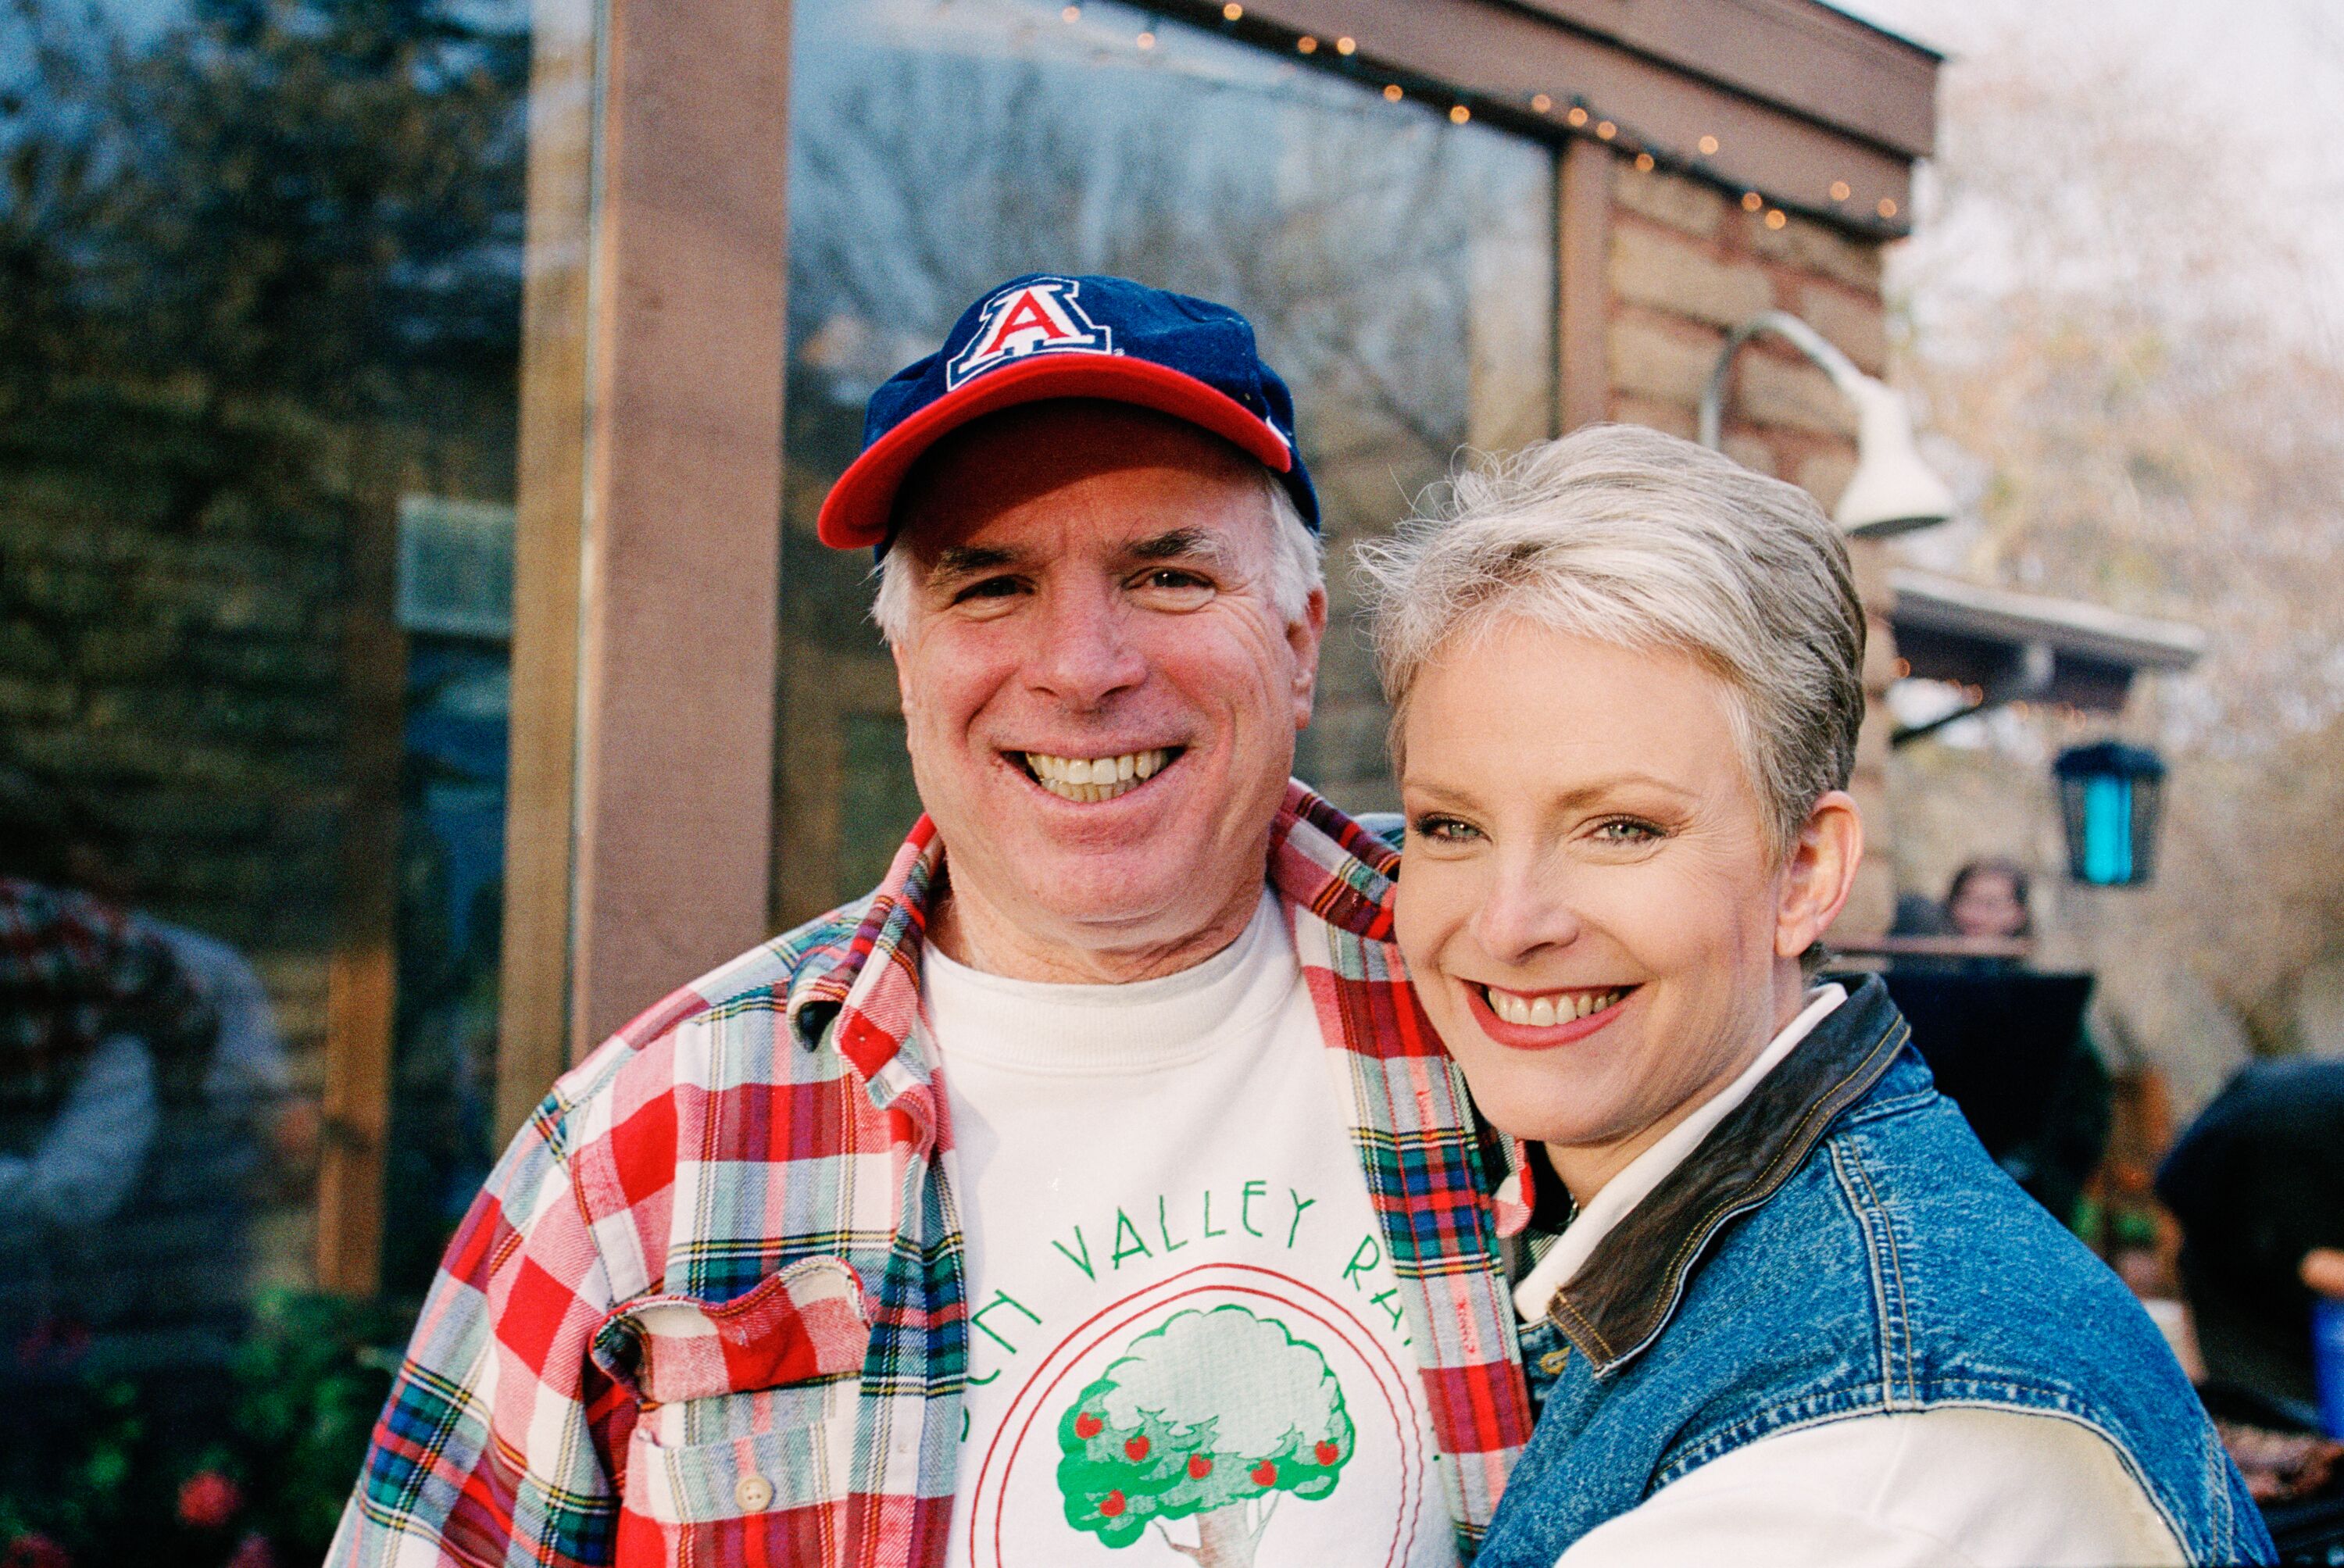 SEDONA, AZ -- MARCH 9: Presidential candidate John McCain (L) and his wife, Cindy McCain, smile for the camera at their family ranch, March 9, 2000 near Sedona, Arizona. (Photo by David Hume Kennerly/Getty Images)